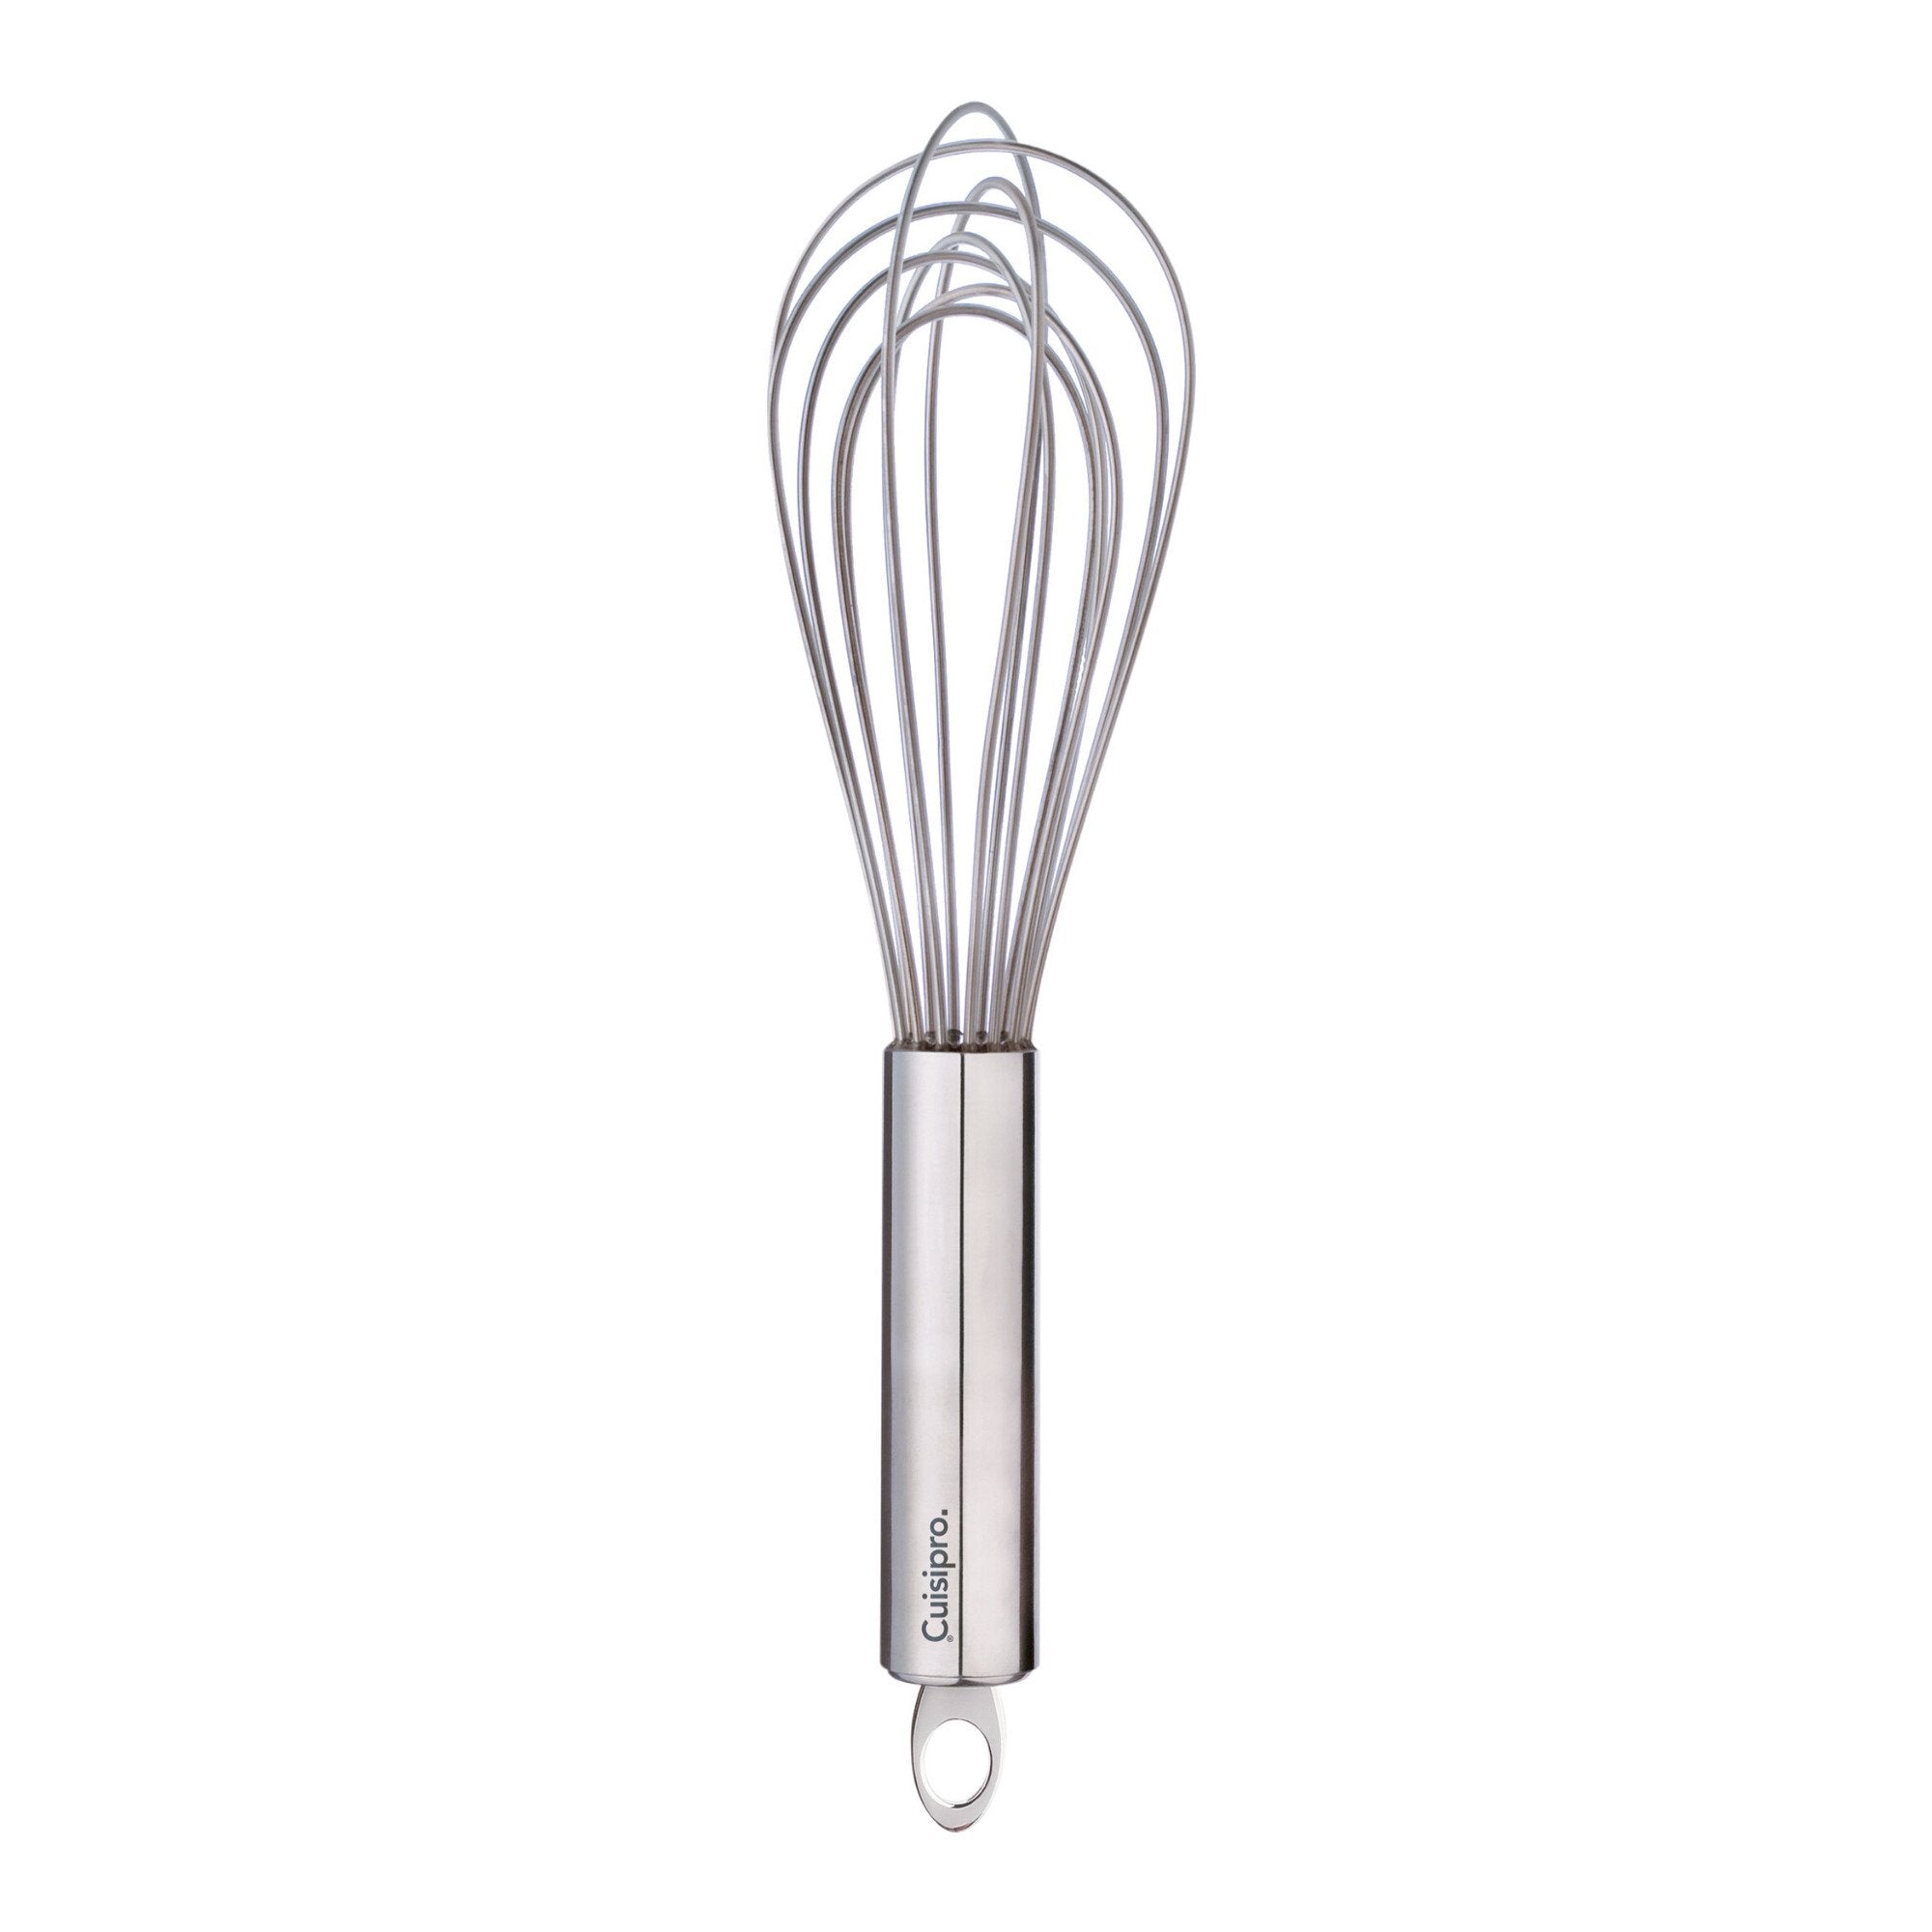 Professional Stainless Steel Balloon Whisk - 12-Inch Steel Wire Whisk Is  Perfect